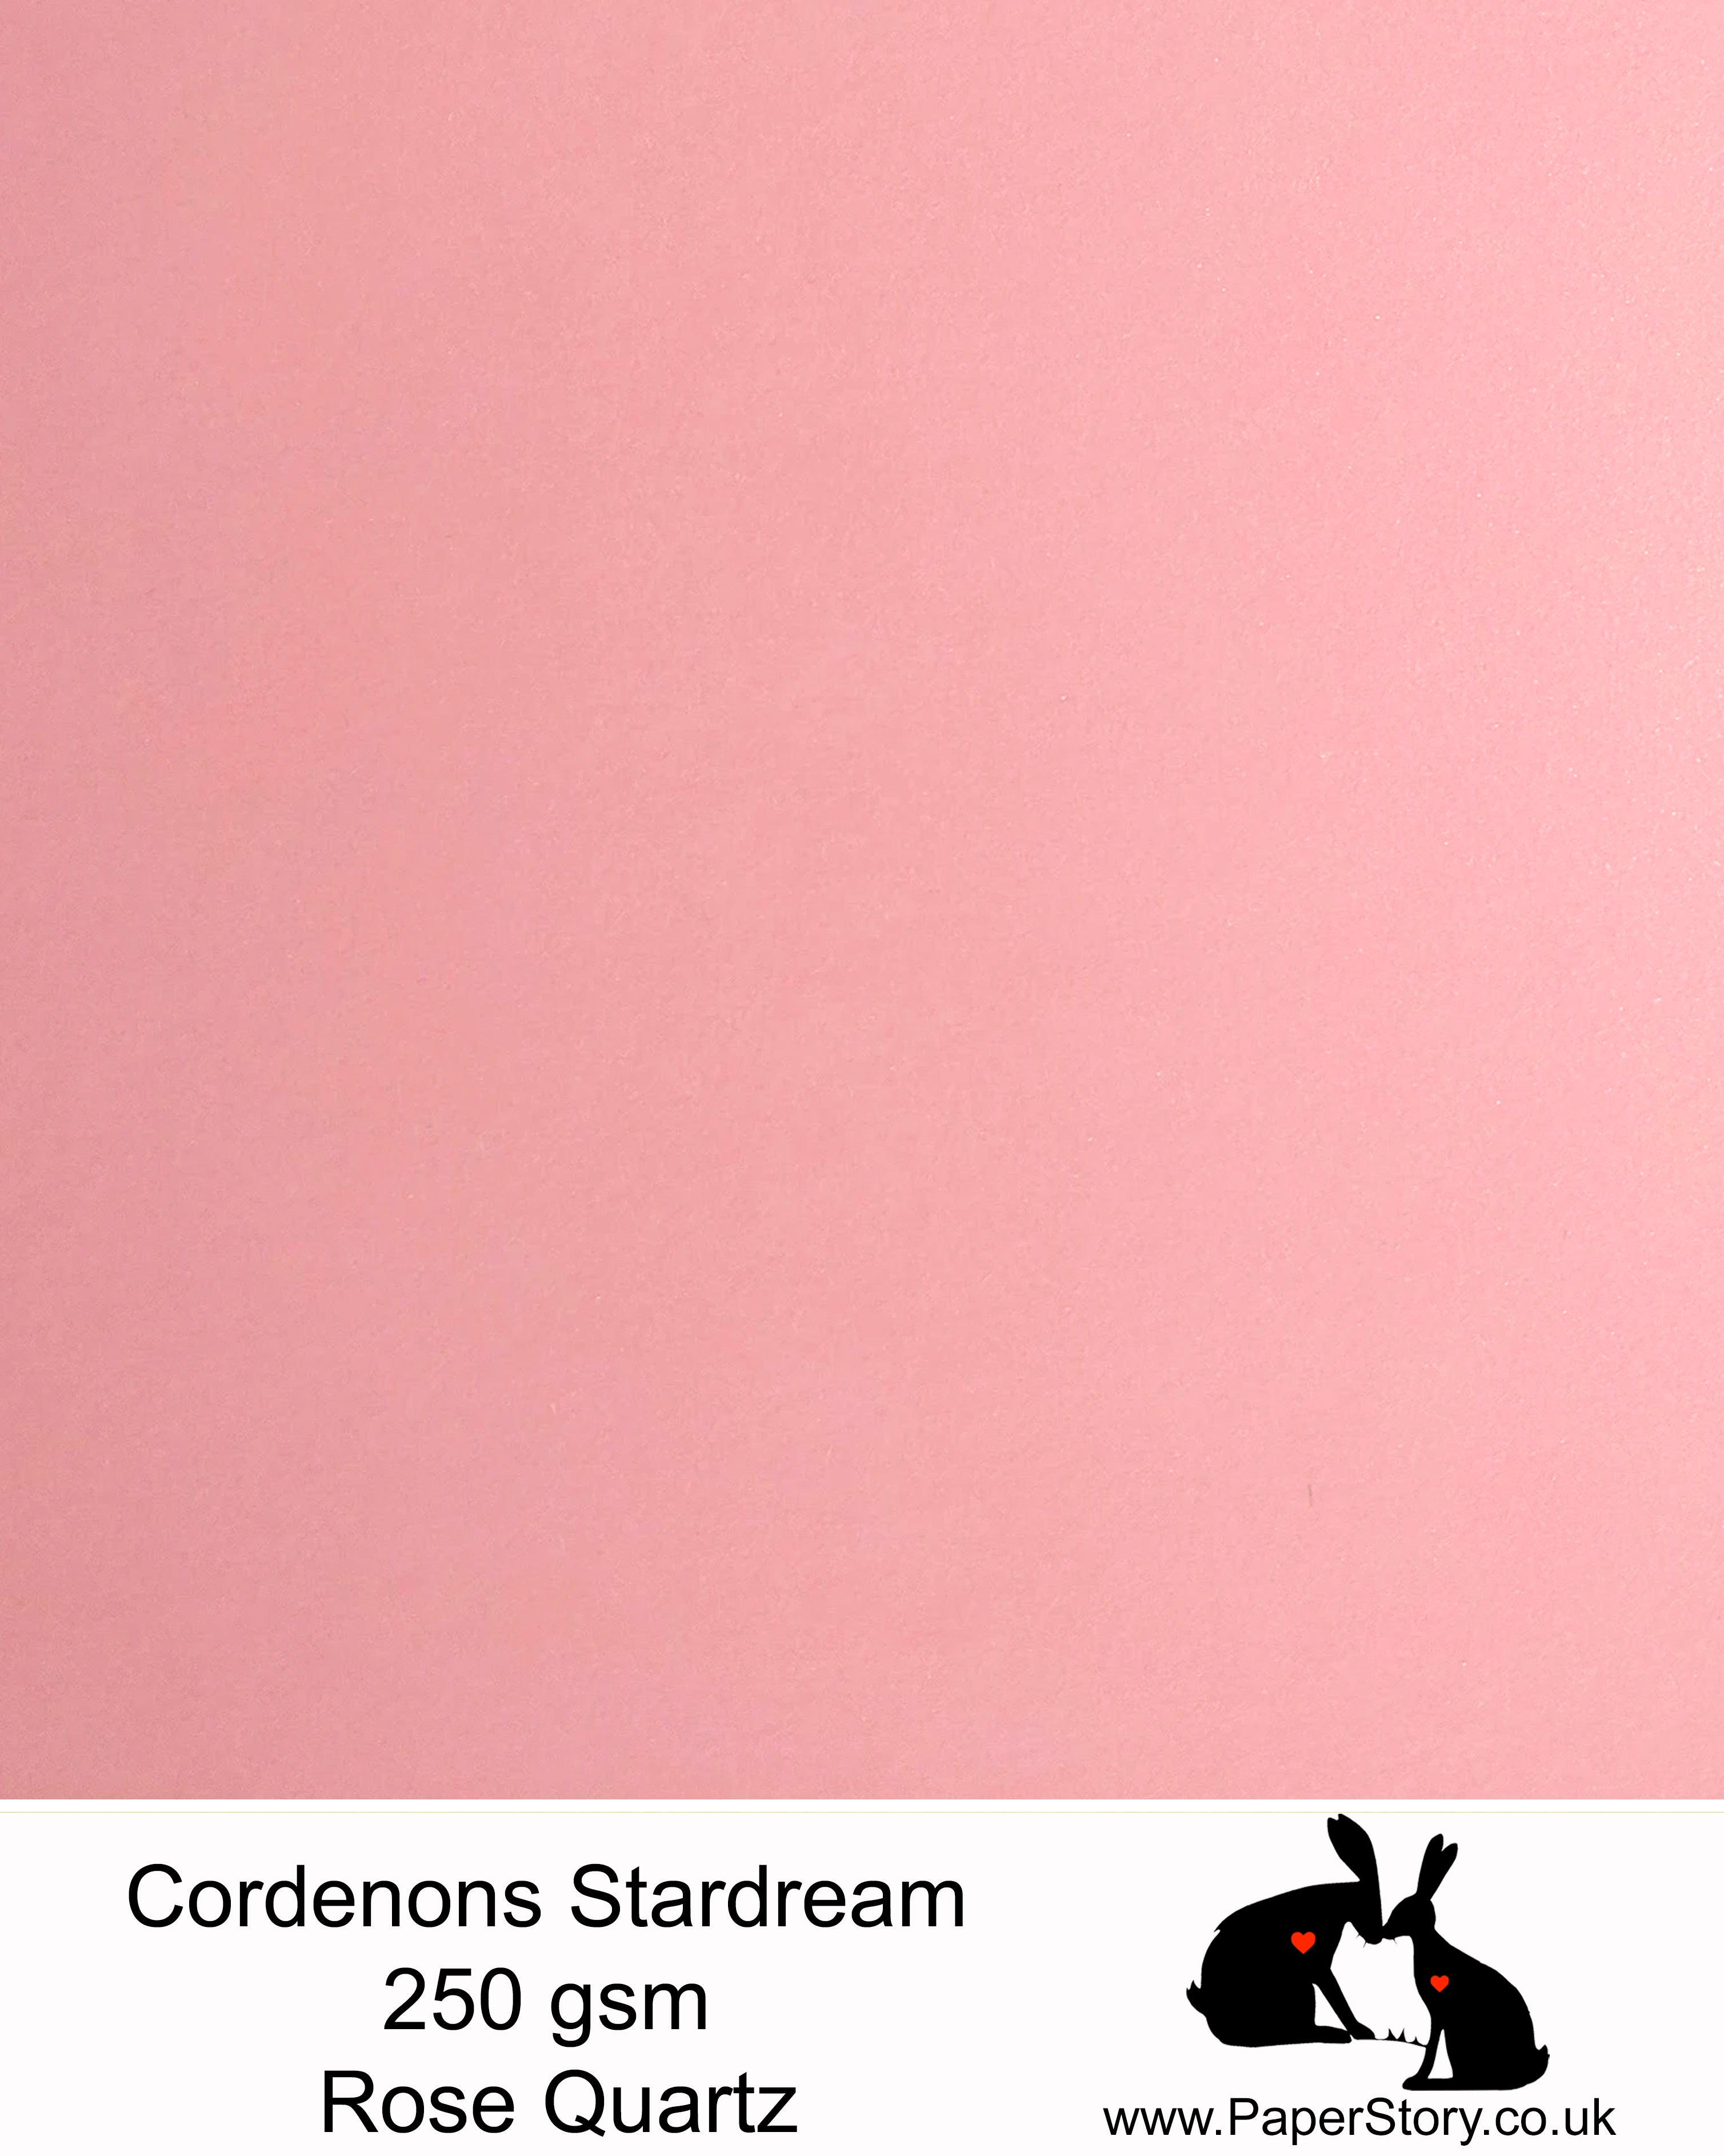 Stardream Rose Quartz, soft pink is a luxury premium branded Italian pearlescent card from Gruppo Cordenons, made in Italy. With a double sided quality pearlescent finish and a colour core, makes this perfect for card making, wedding invitations and stationery.FSC certified, acid free, archival and PH neutral 